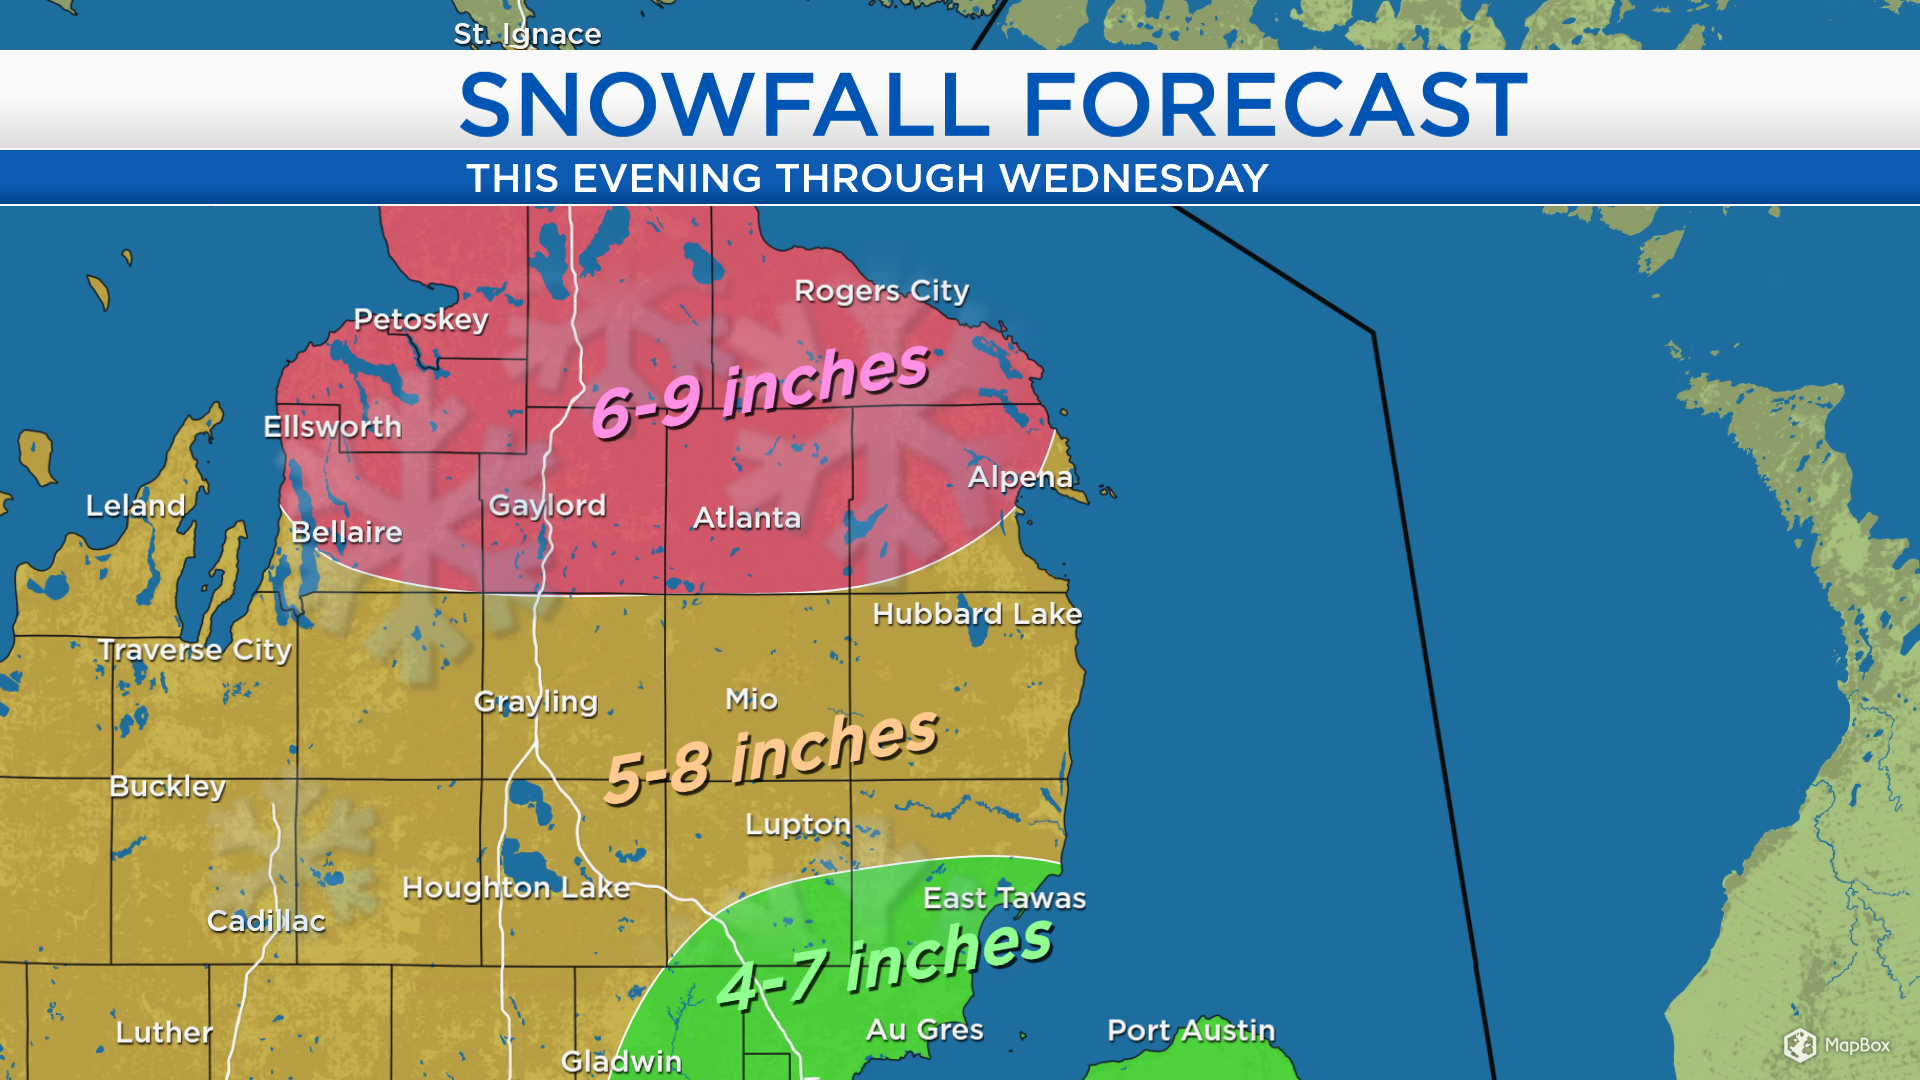 Winter Storm Warning for parts of Northern Michigan tonightWednesday